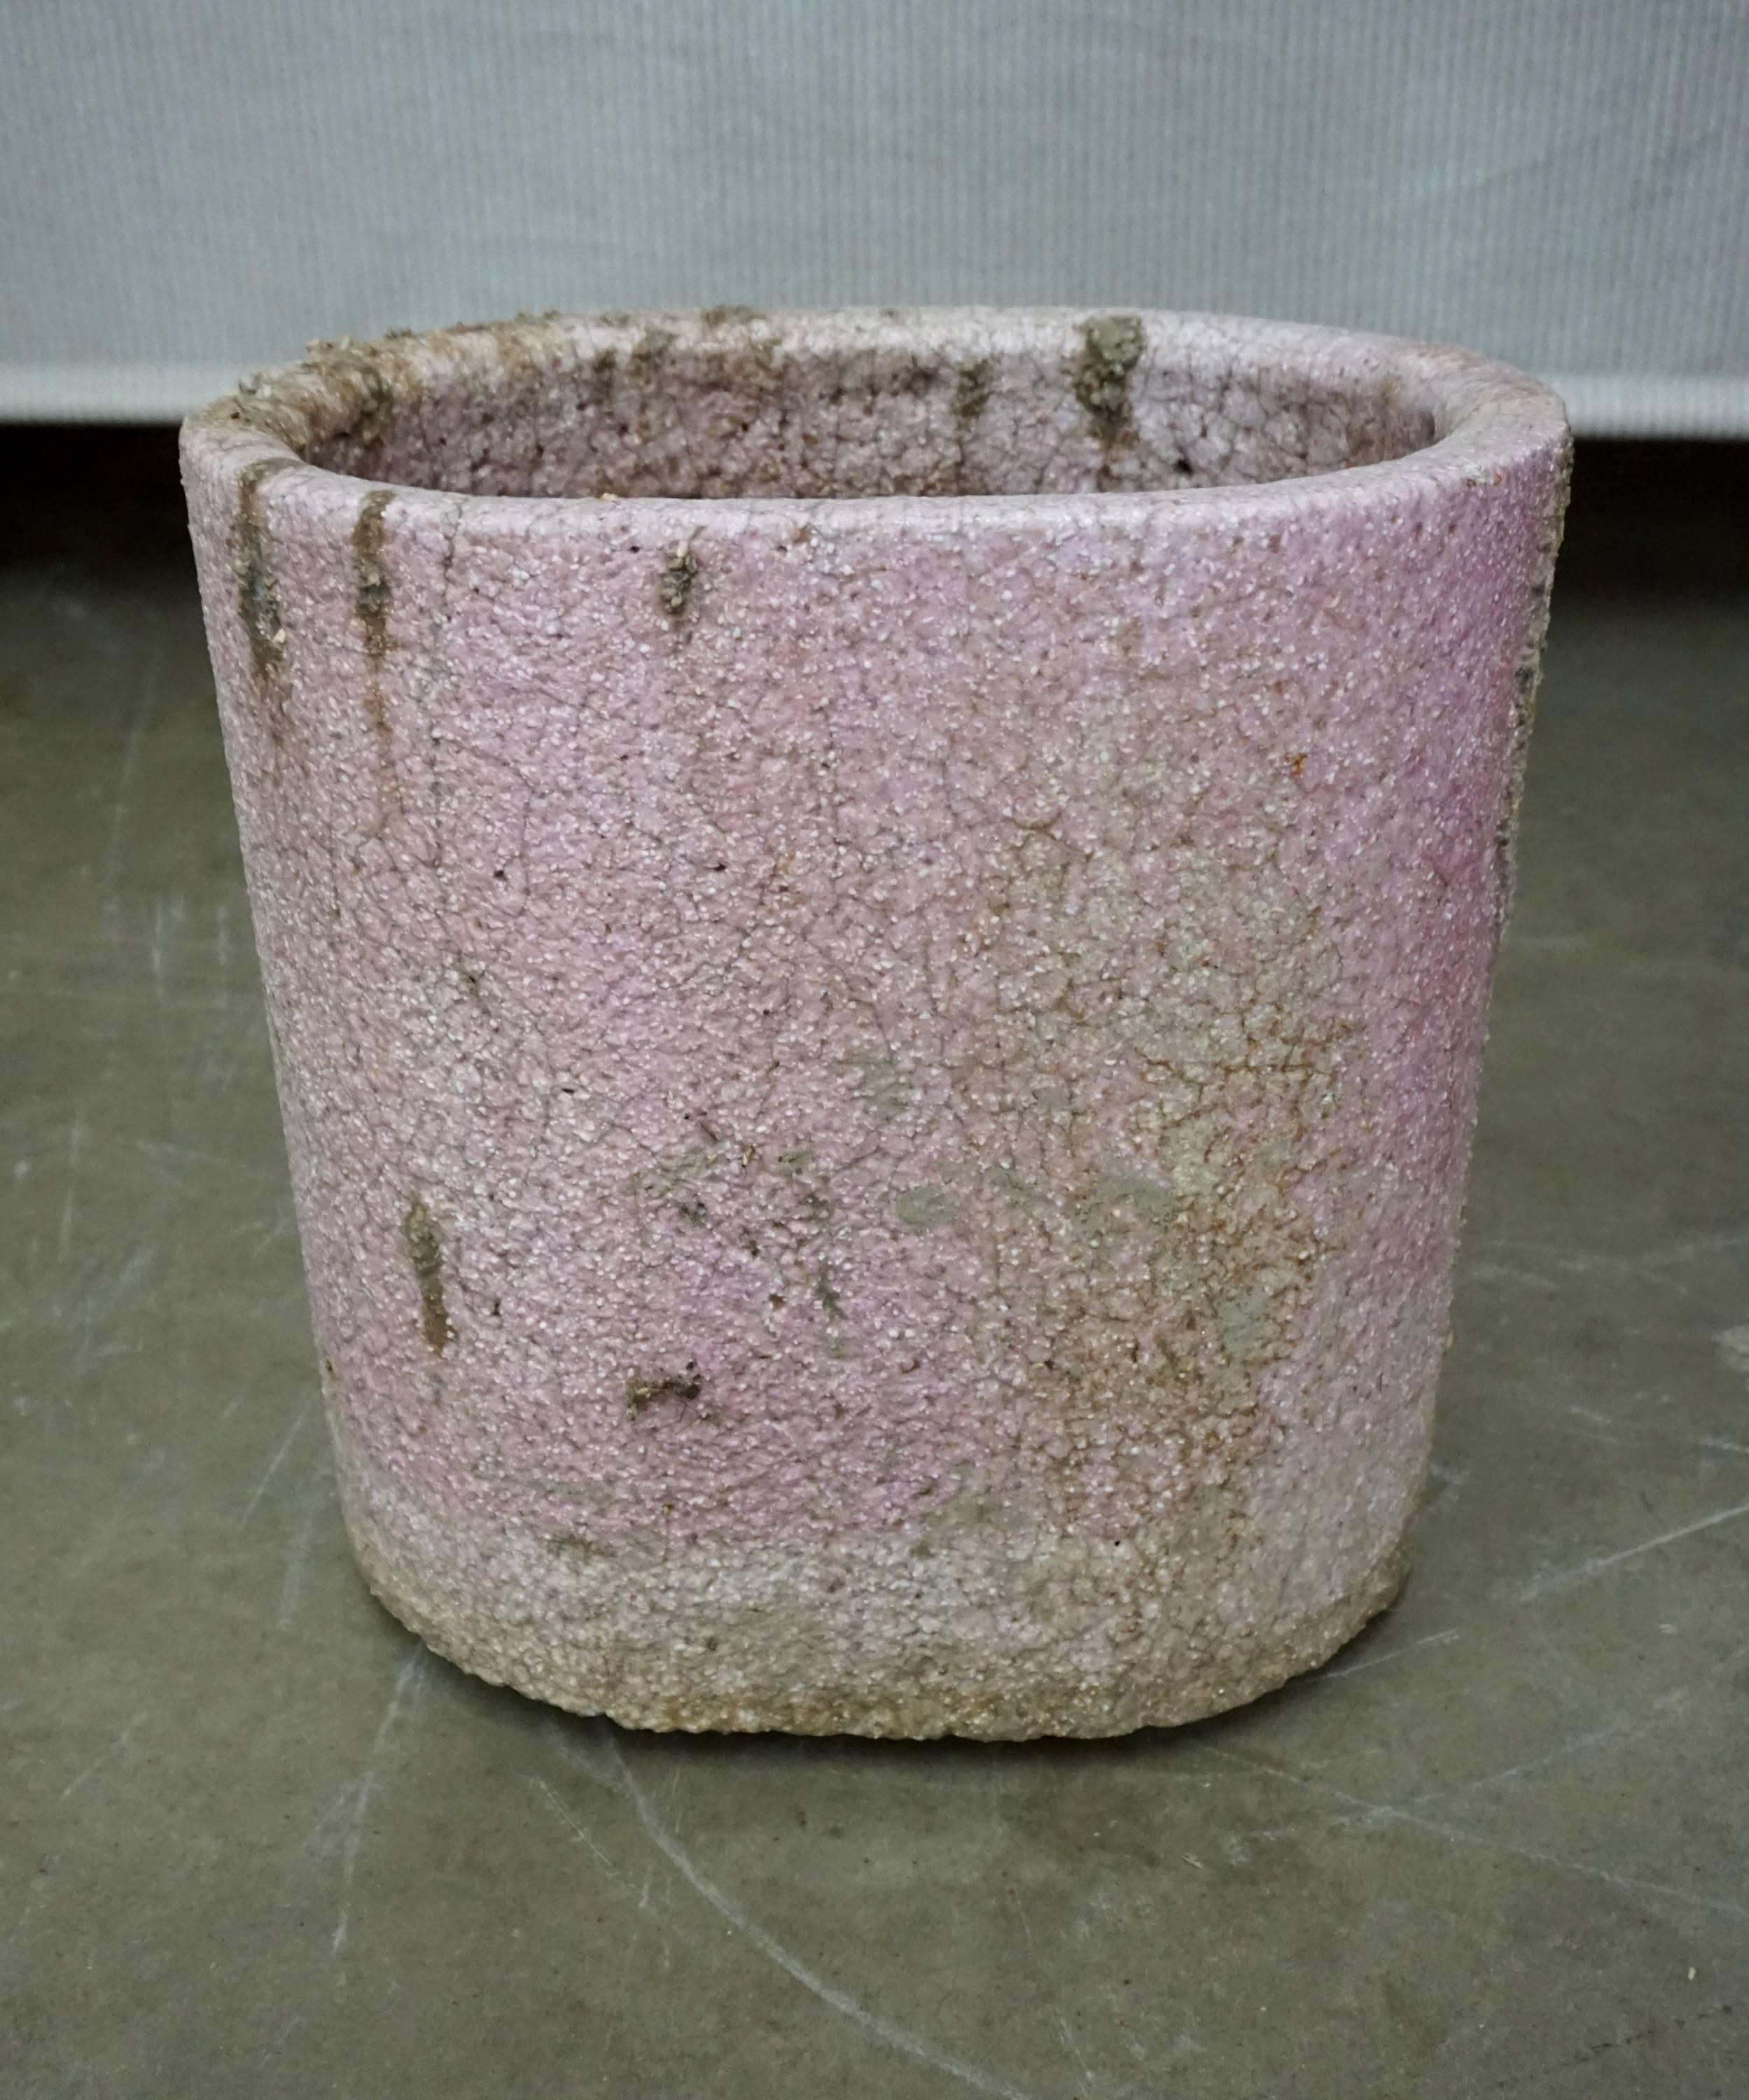 Ceramic vessel used to melt glass at very high temperatures. Enhanced by the crackling and the glass remnants and drippings. Can be used as a planter or decorative object, indoors or outdoors.
Multiple crucibles available.